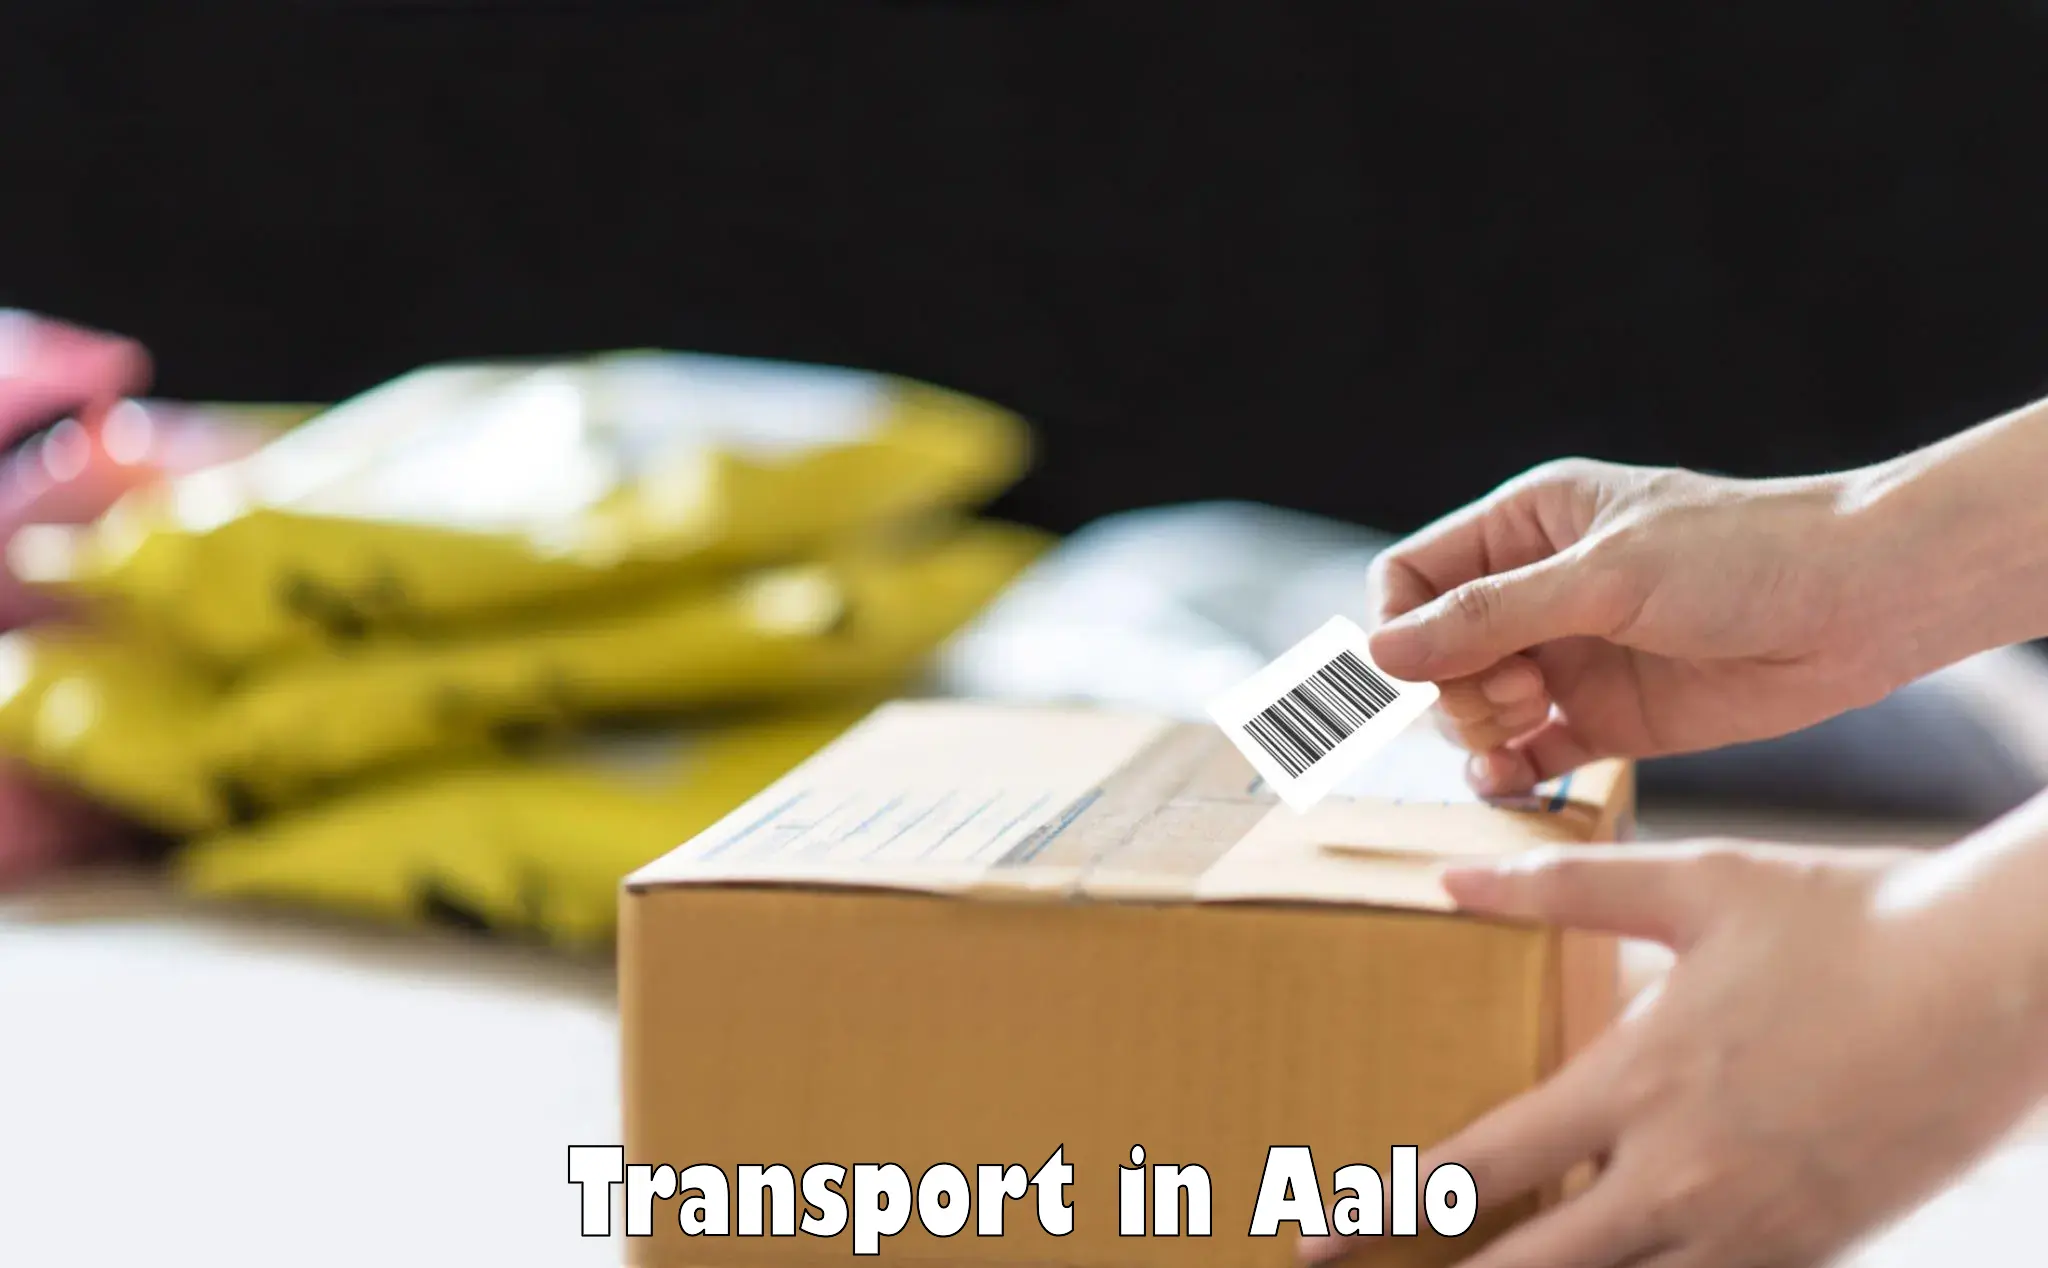 Luggage transport services in Aalo